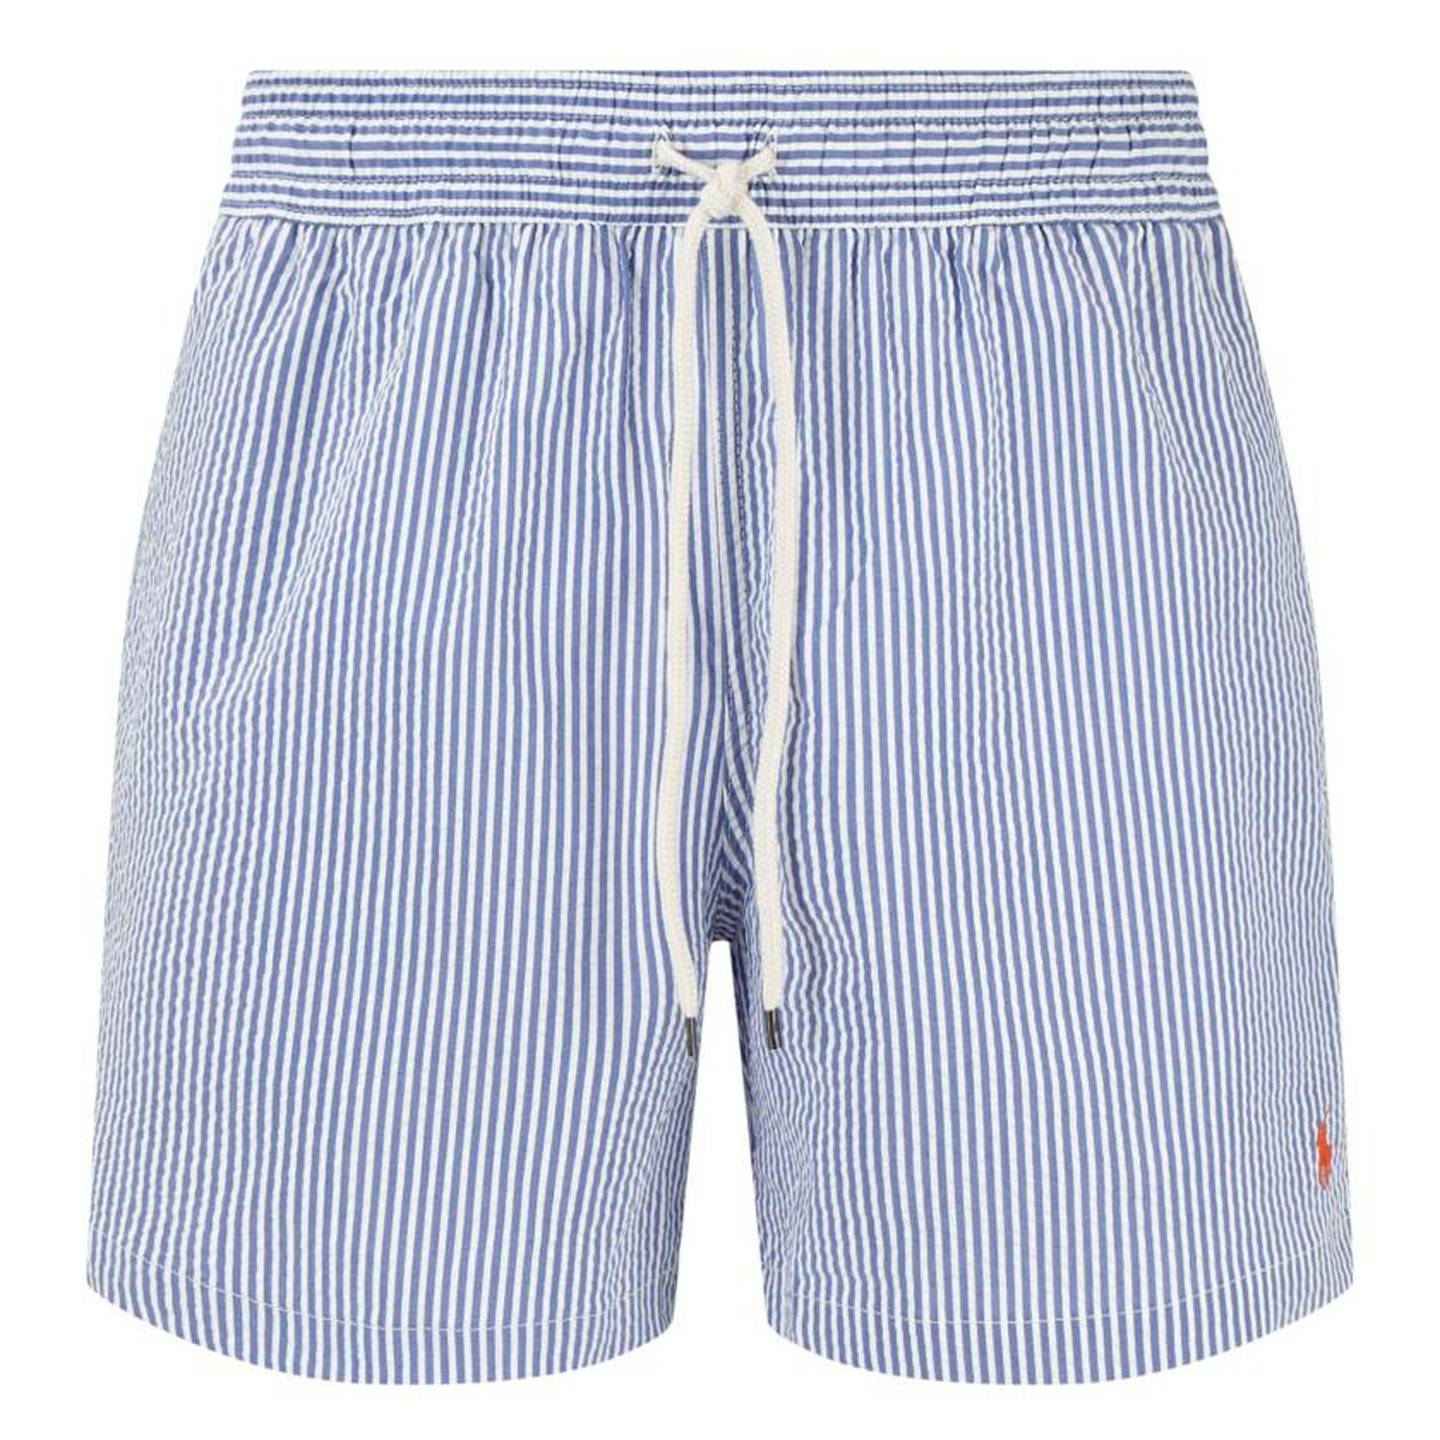 What are the best clothes, fabrics to wear to stay cool in the summer ...